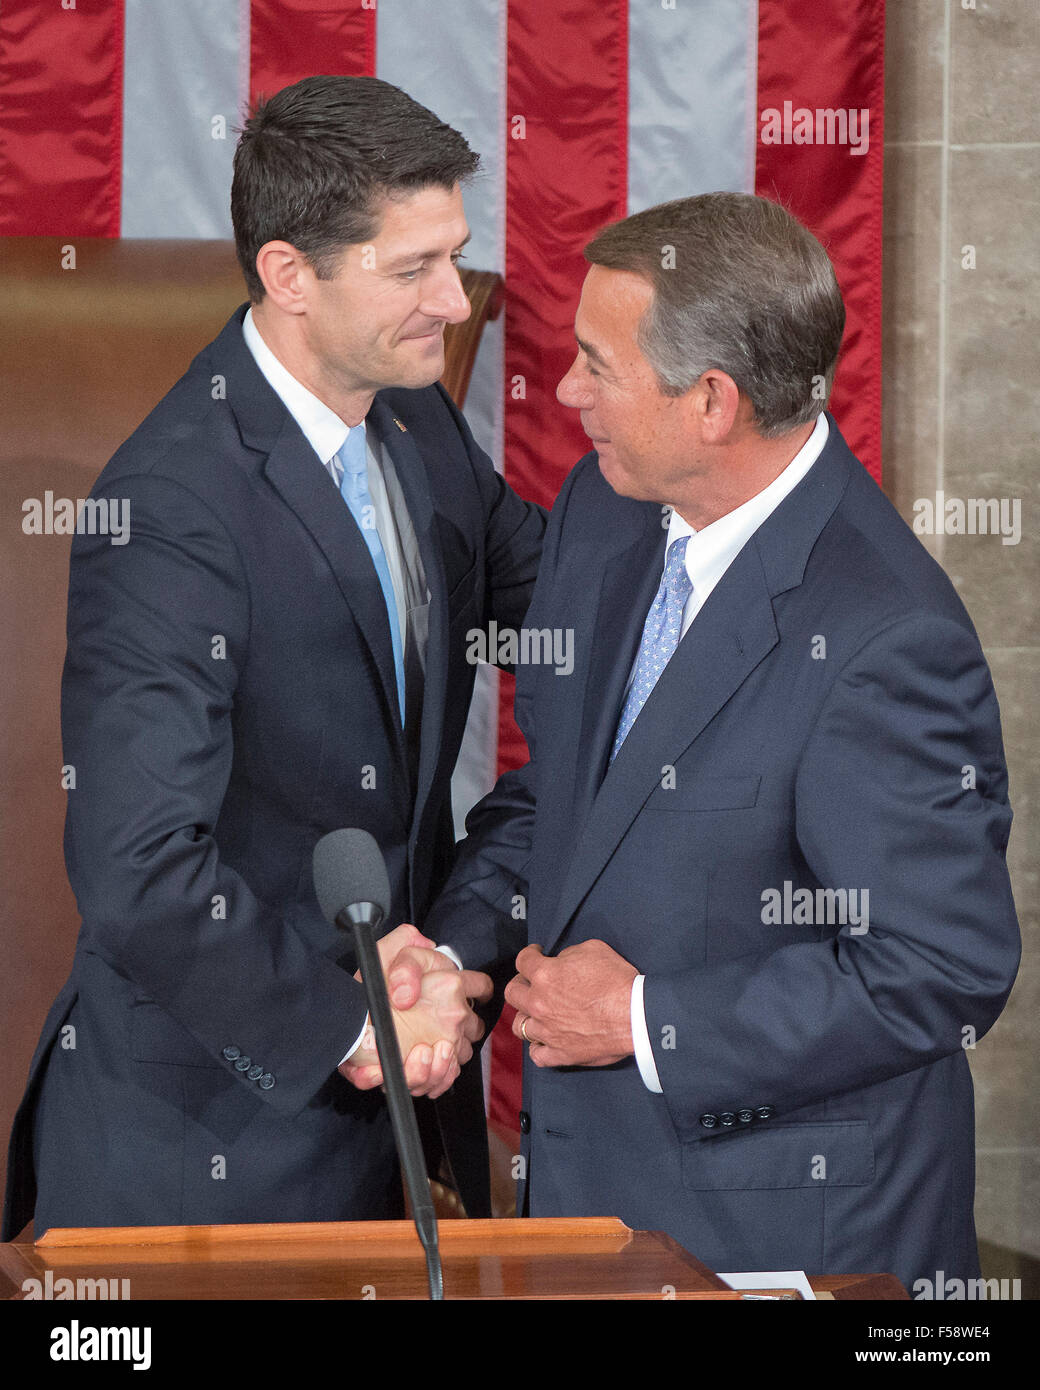 Washington, DC, USA. 29th October, 2015.  Incoming Speaker of the United States House of Representatives Paul Ryan (Republican of Wisconsin), left, is welcomed to the podium by outgoing Speaker John Boehner (Republican of Ohio), right, as Ryan assumes his duties of the office in the US House Chamber in the US Capitol in Washington, DC on Thursday, October 29, 2015. Credit:  dpa picture alliance/Alamy Live News Stock Photo